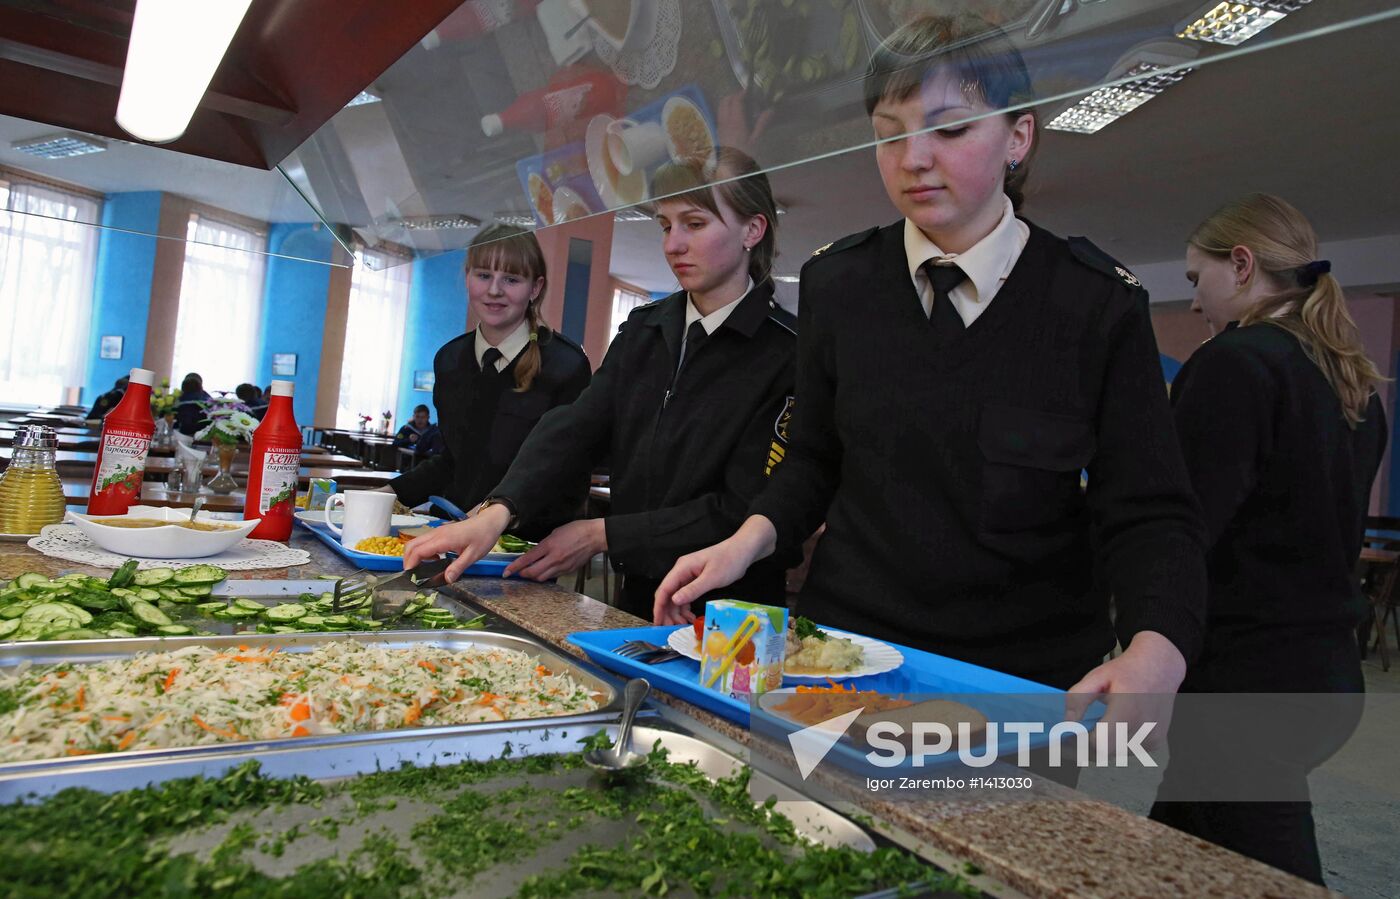 Buffet-style meals introduced in Russian army